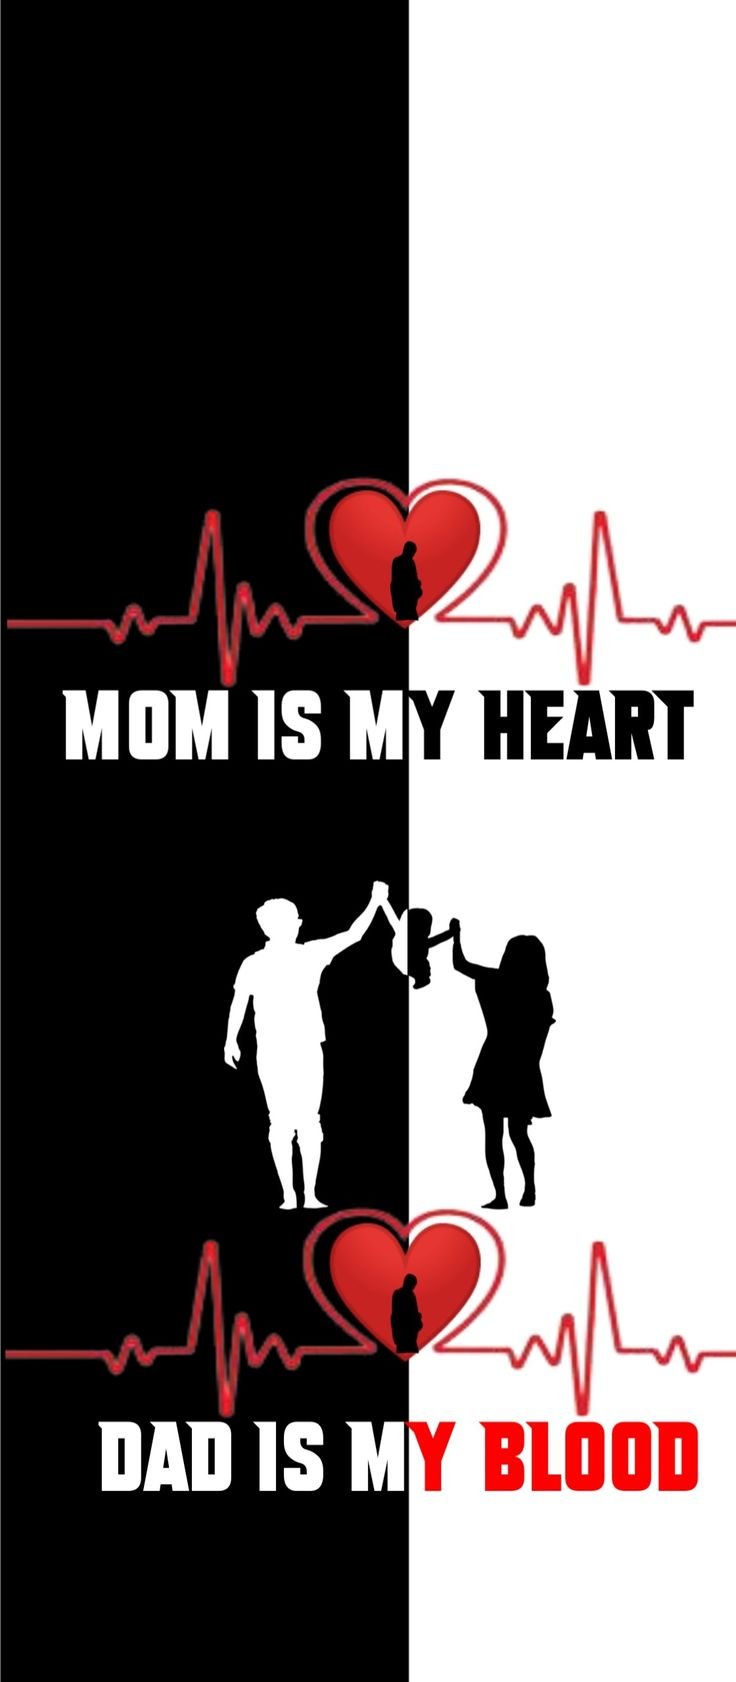 Mom Is My Heart - Dad Is My Blood